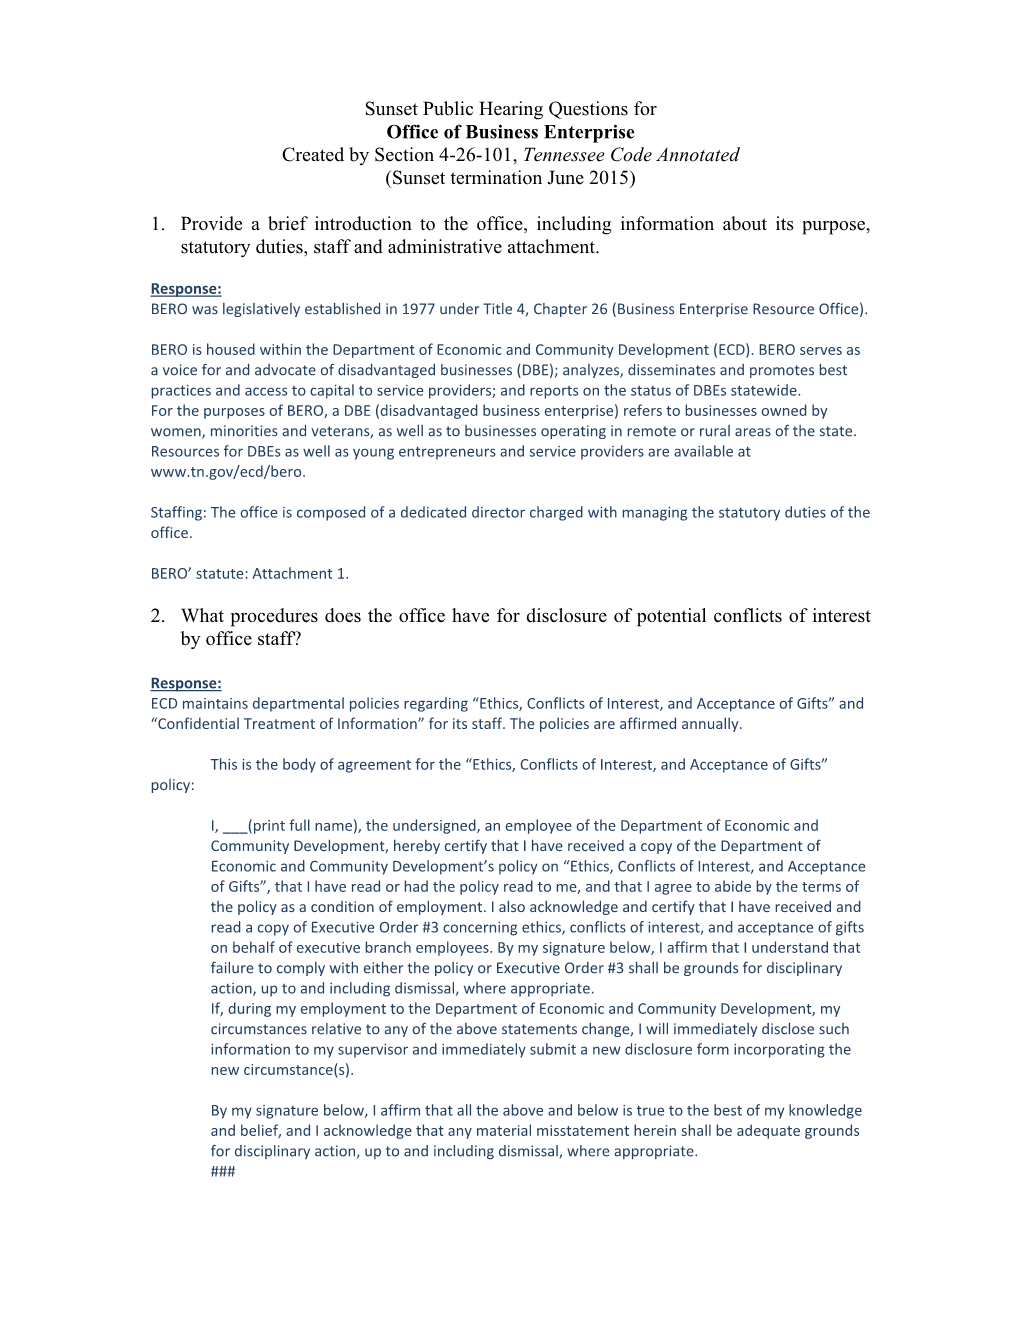 Sunset Public Hearing Questions for Office of Business Enterprise Created by Section 4-26-101, Tennessee Code Annotated (Sunset Termination June 2015)